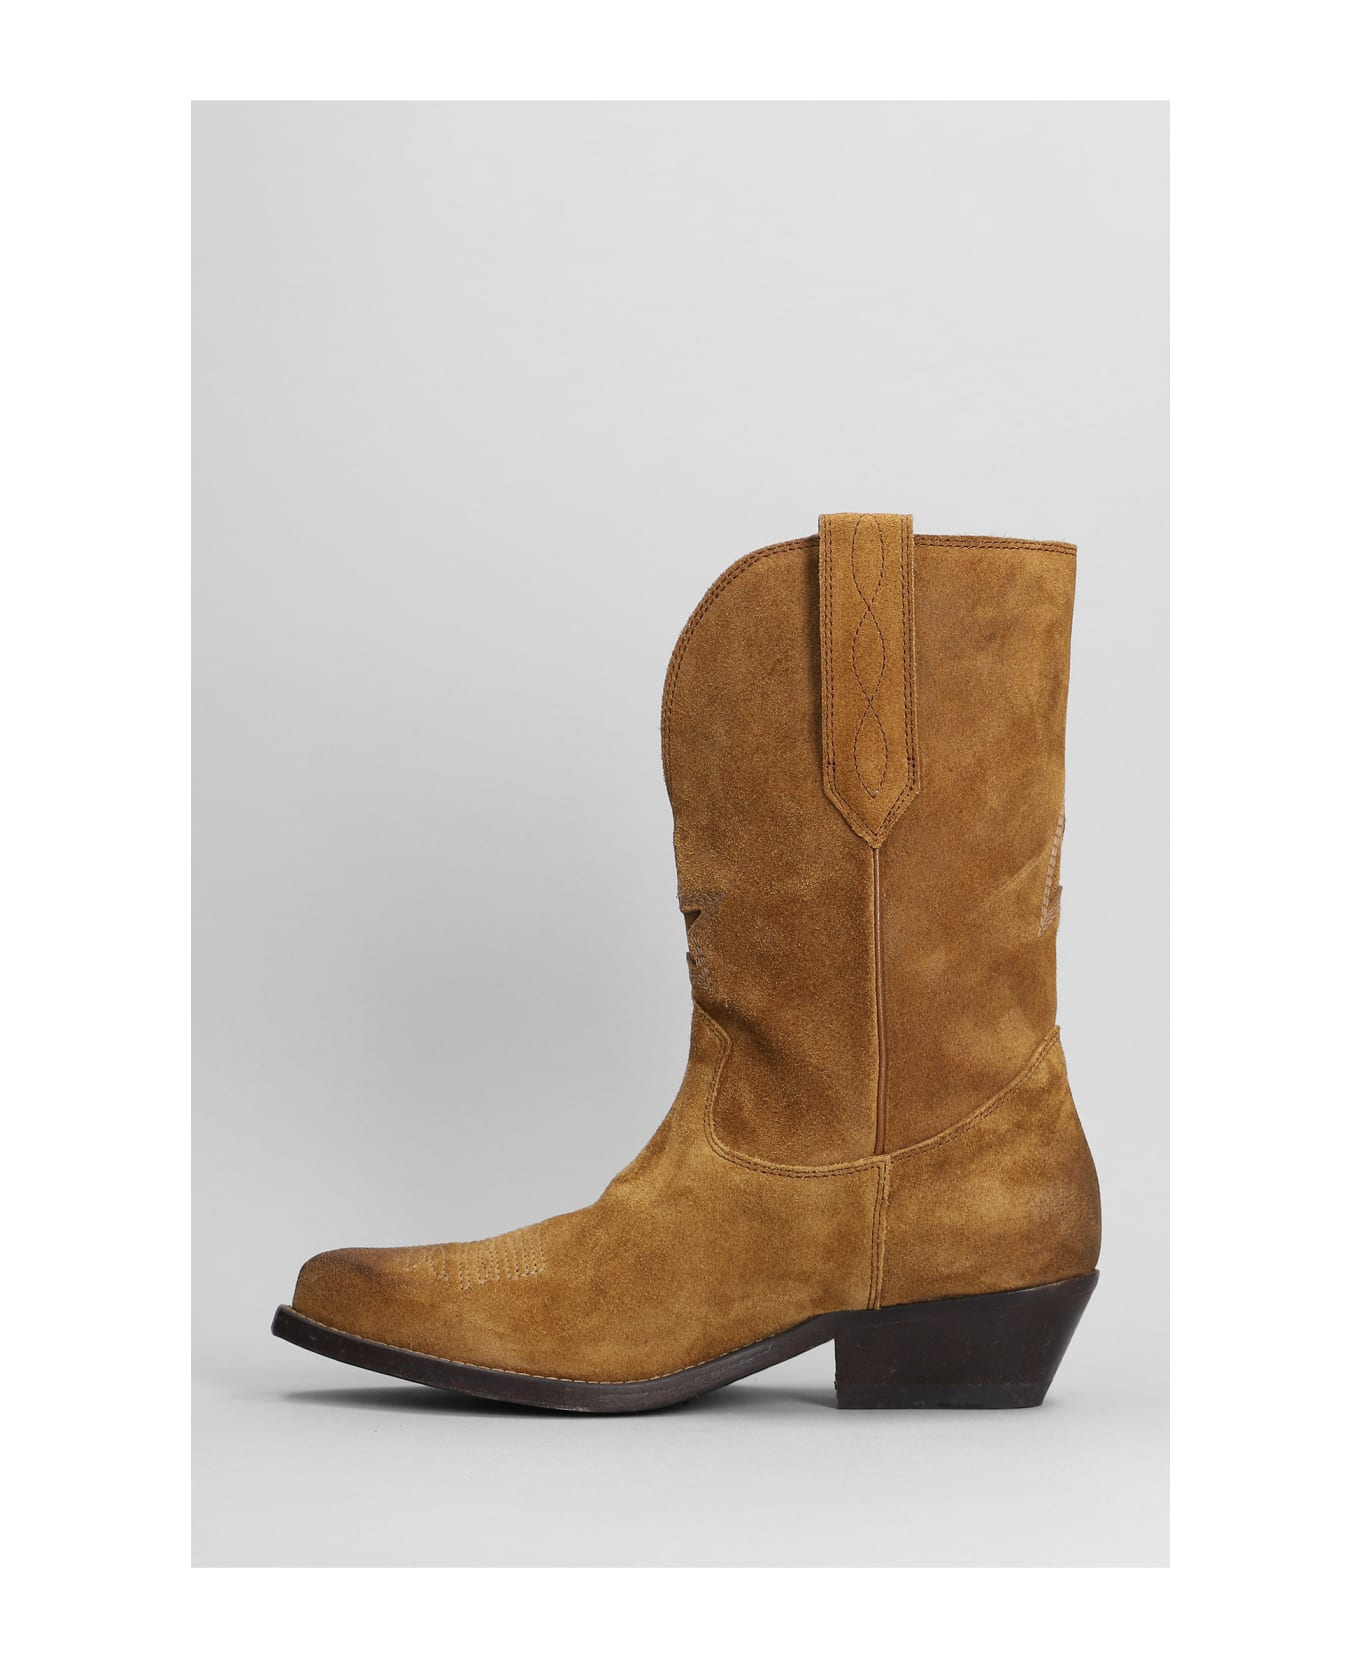 Golden Goose Wish Star Texan Boots In Leather Color Suede - leather color